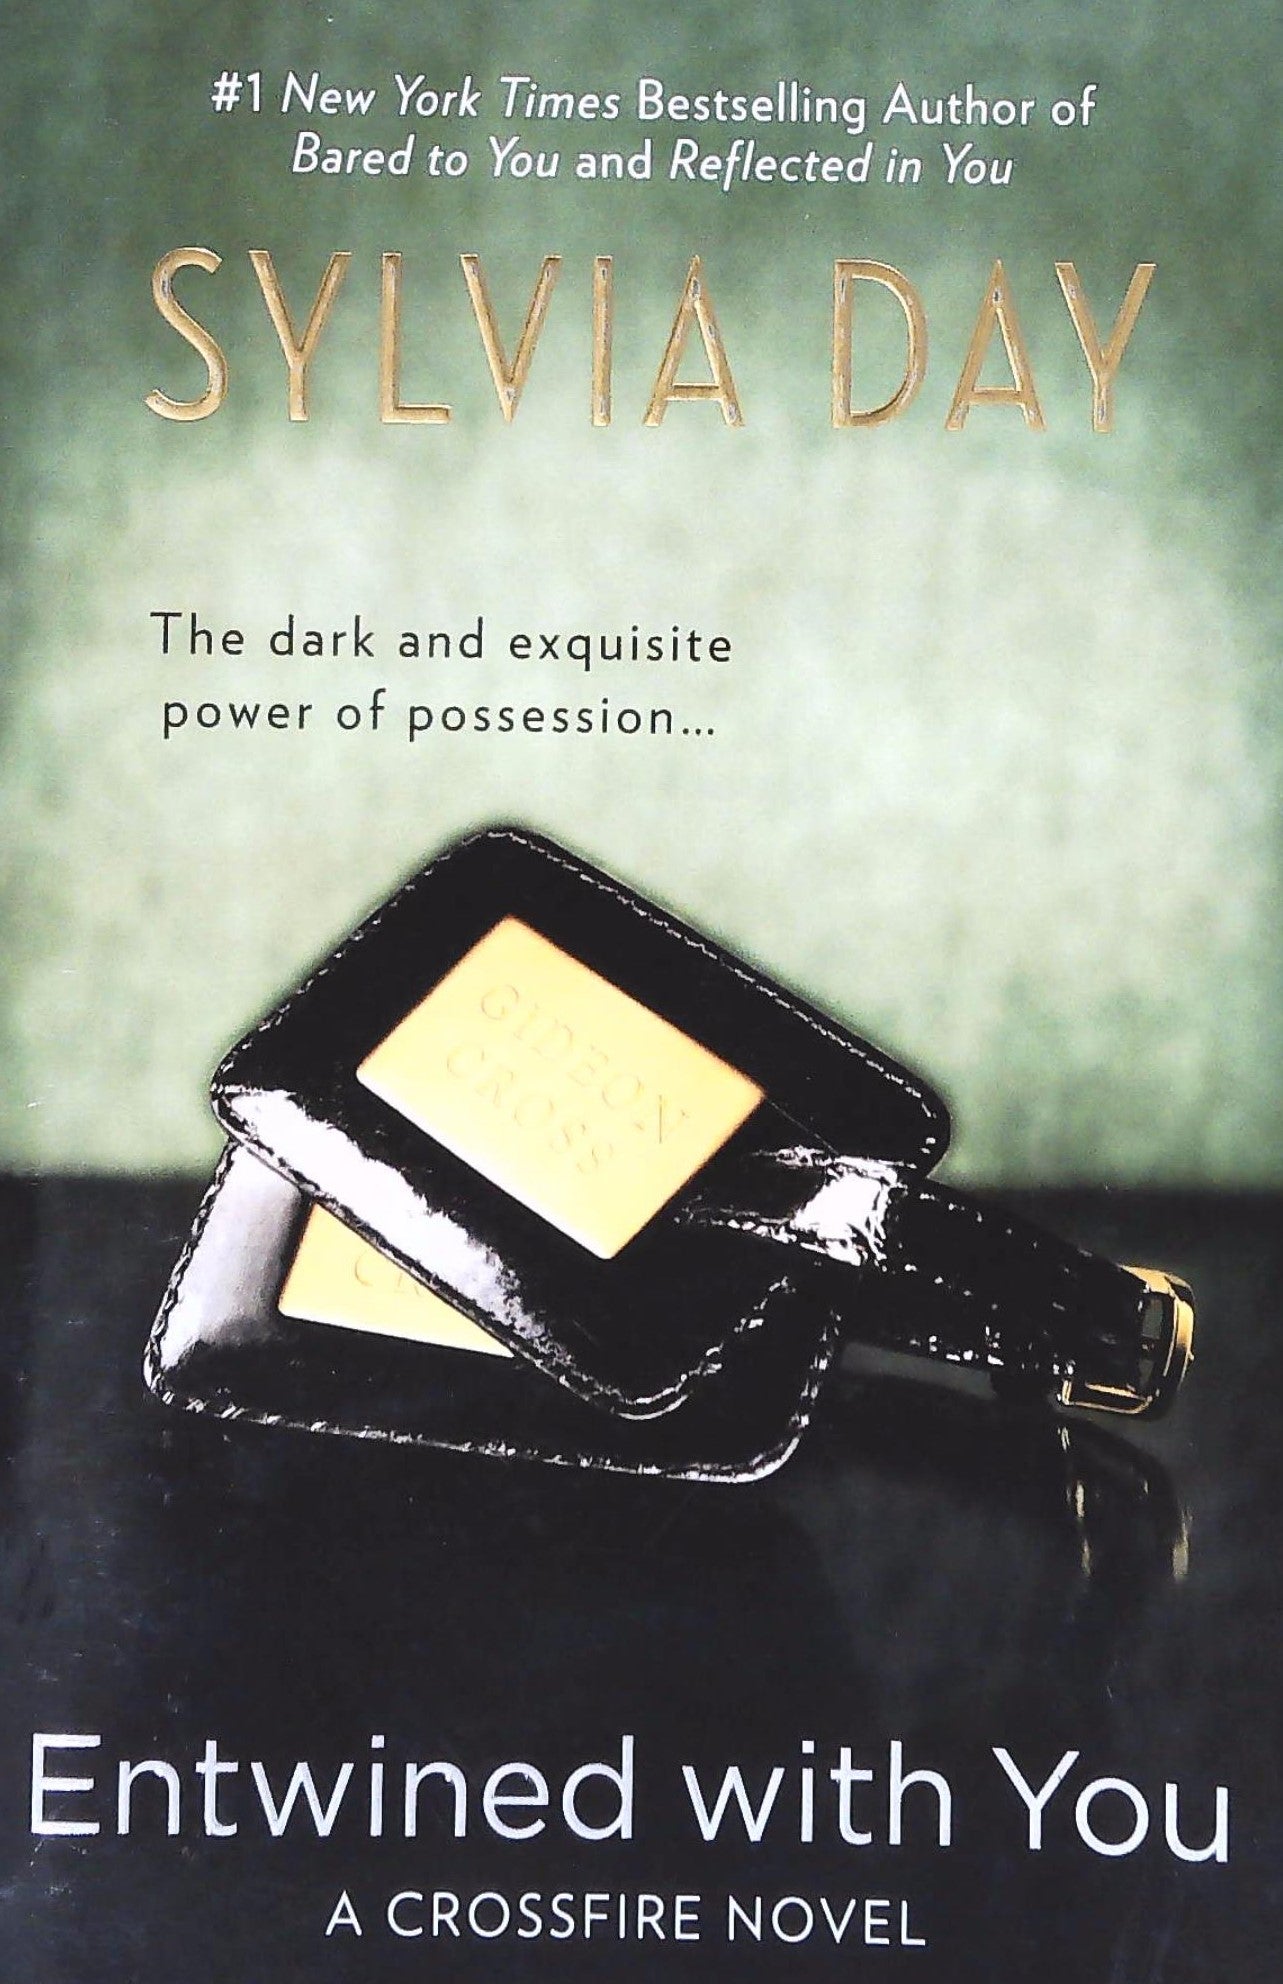 Livre ISBN 0425263924 Crossfire : Entwined with You (Sylvia Day)